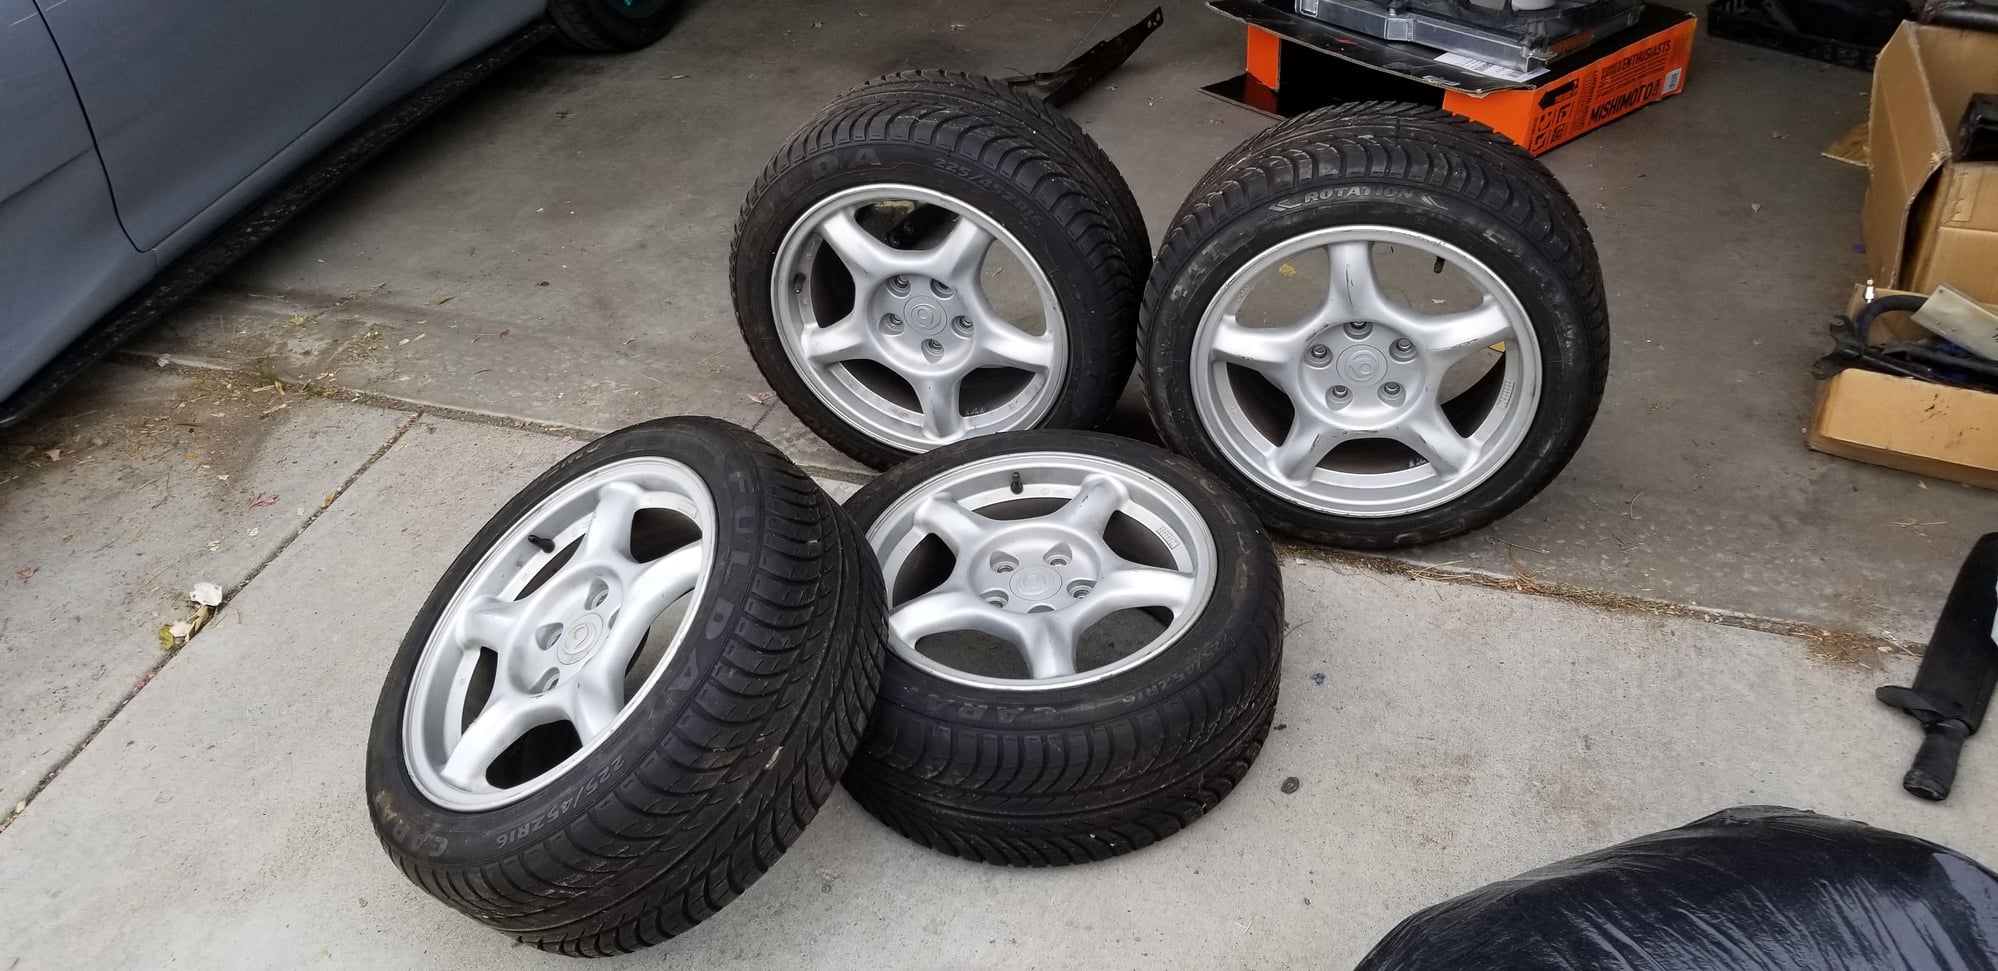 Wheels and Tires/Axles - FD OEM Wheels - Used - 1993 to 1995 Mazda RX-7 - Denver, CO 80211, United States